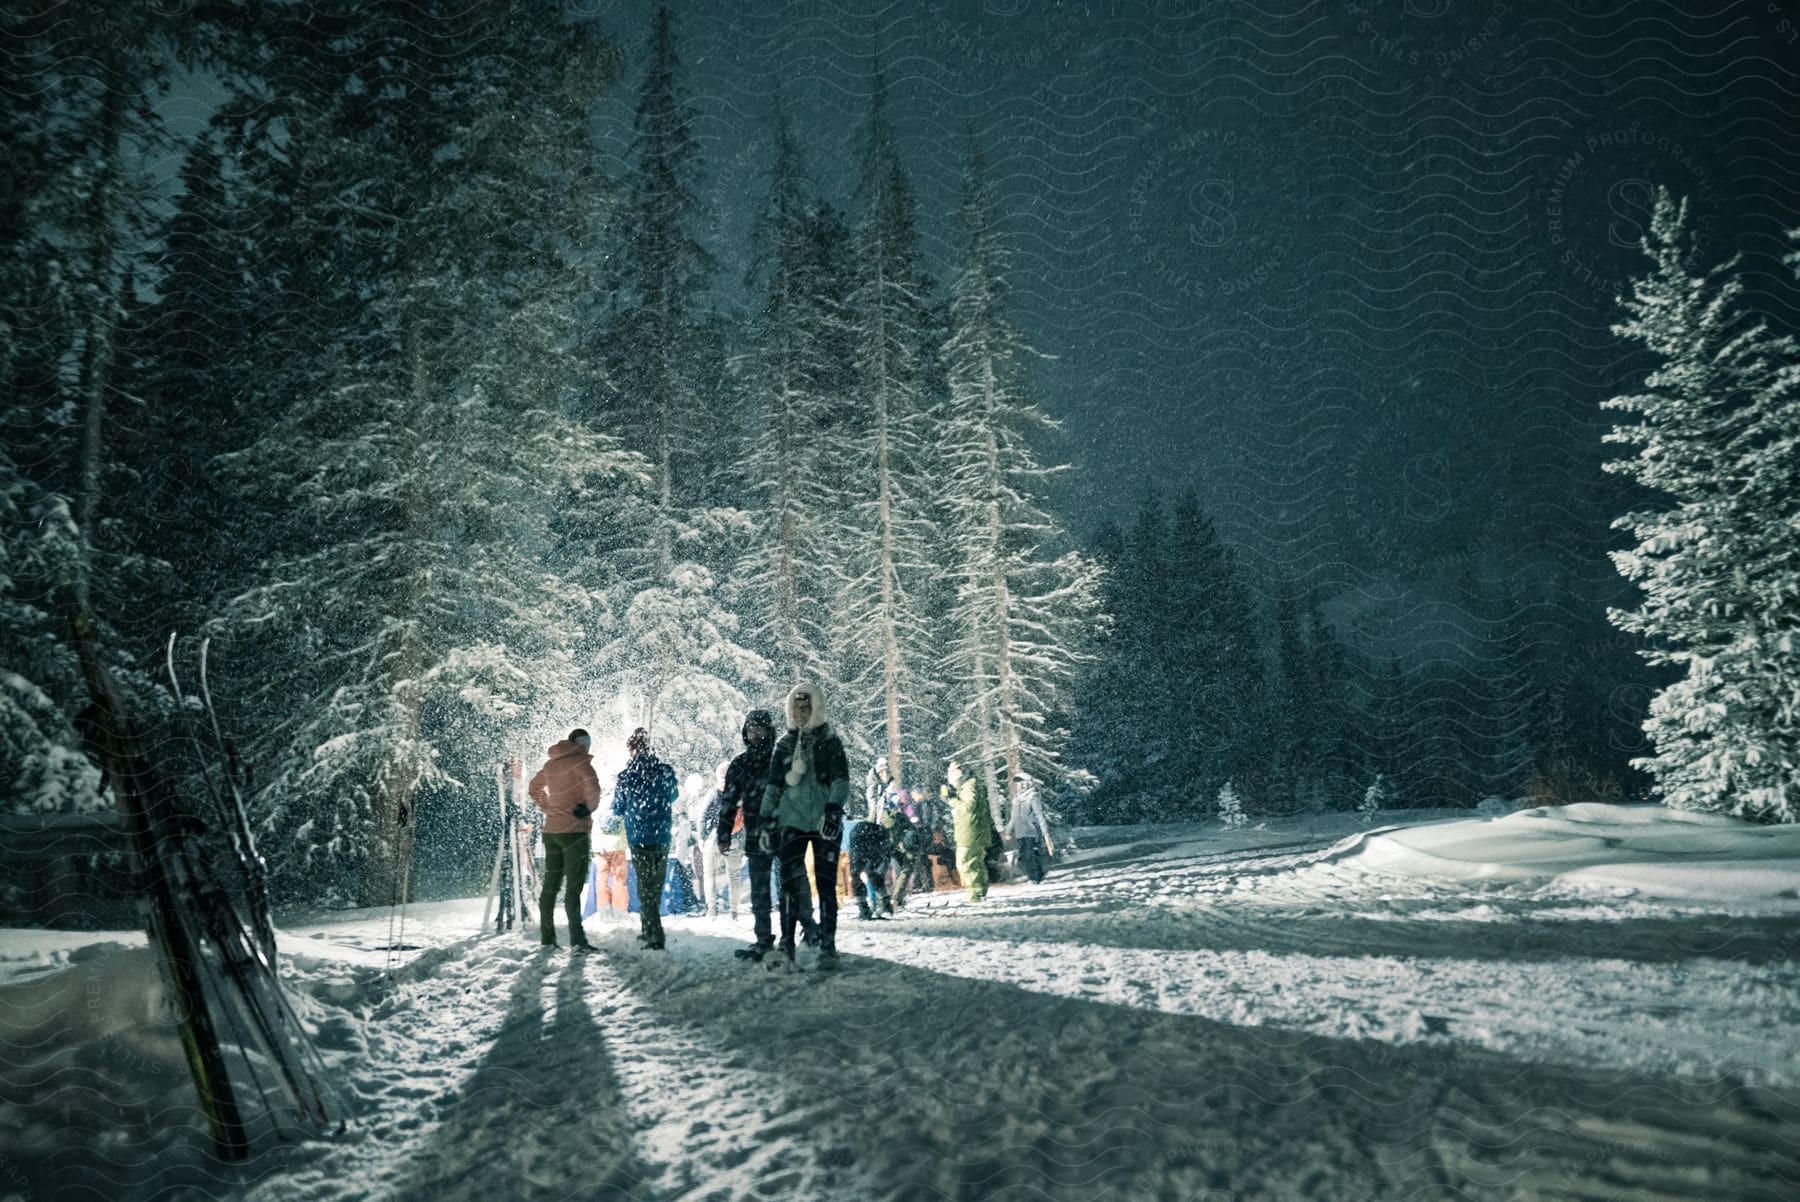 A group of people in a snowy forest at night, with back lighting.